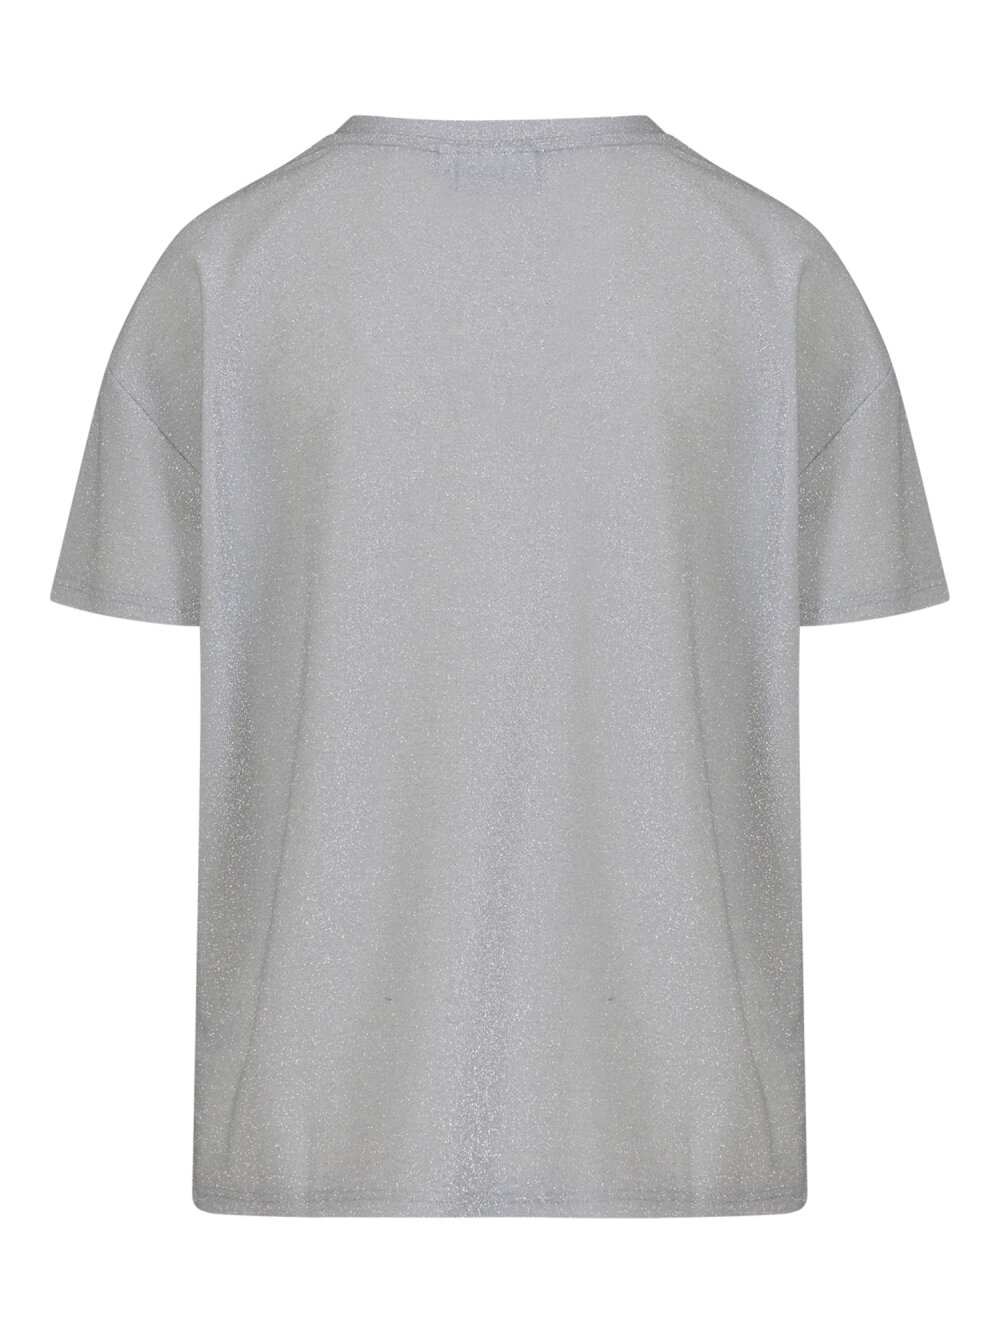 Coster Copenhagen - T-shirt With Shimmer Silver